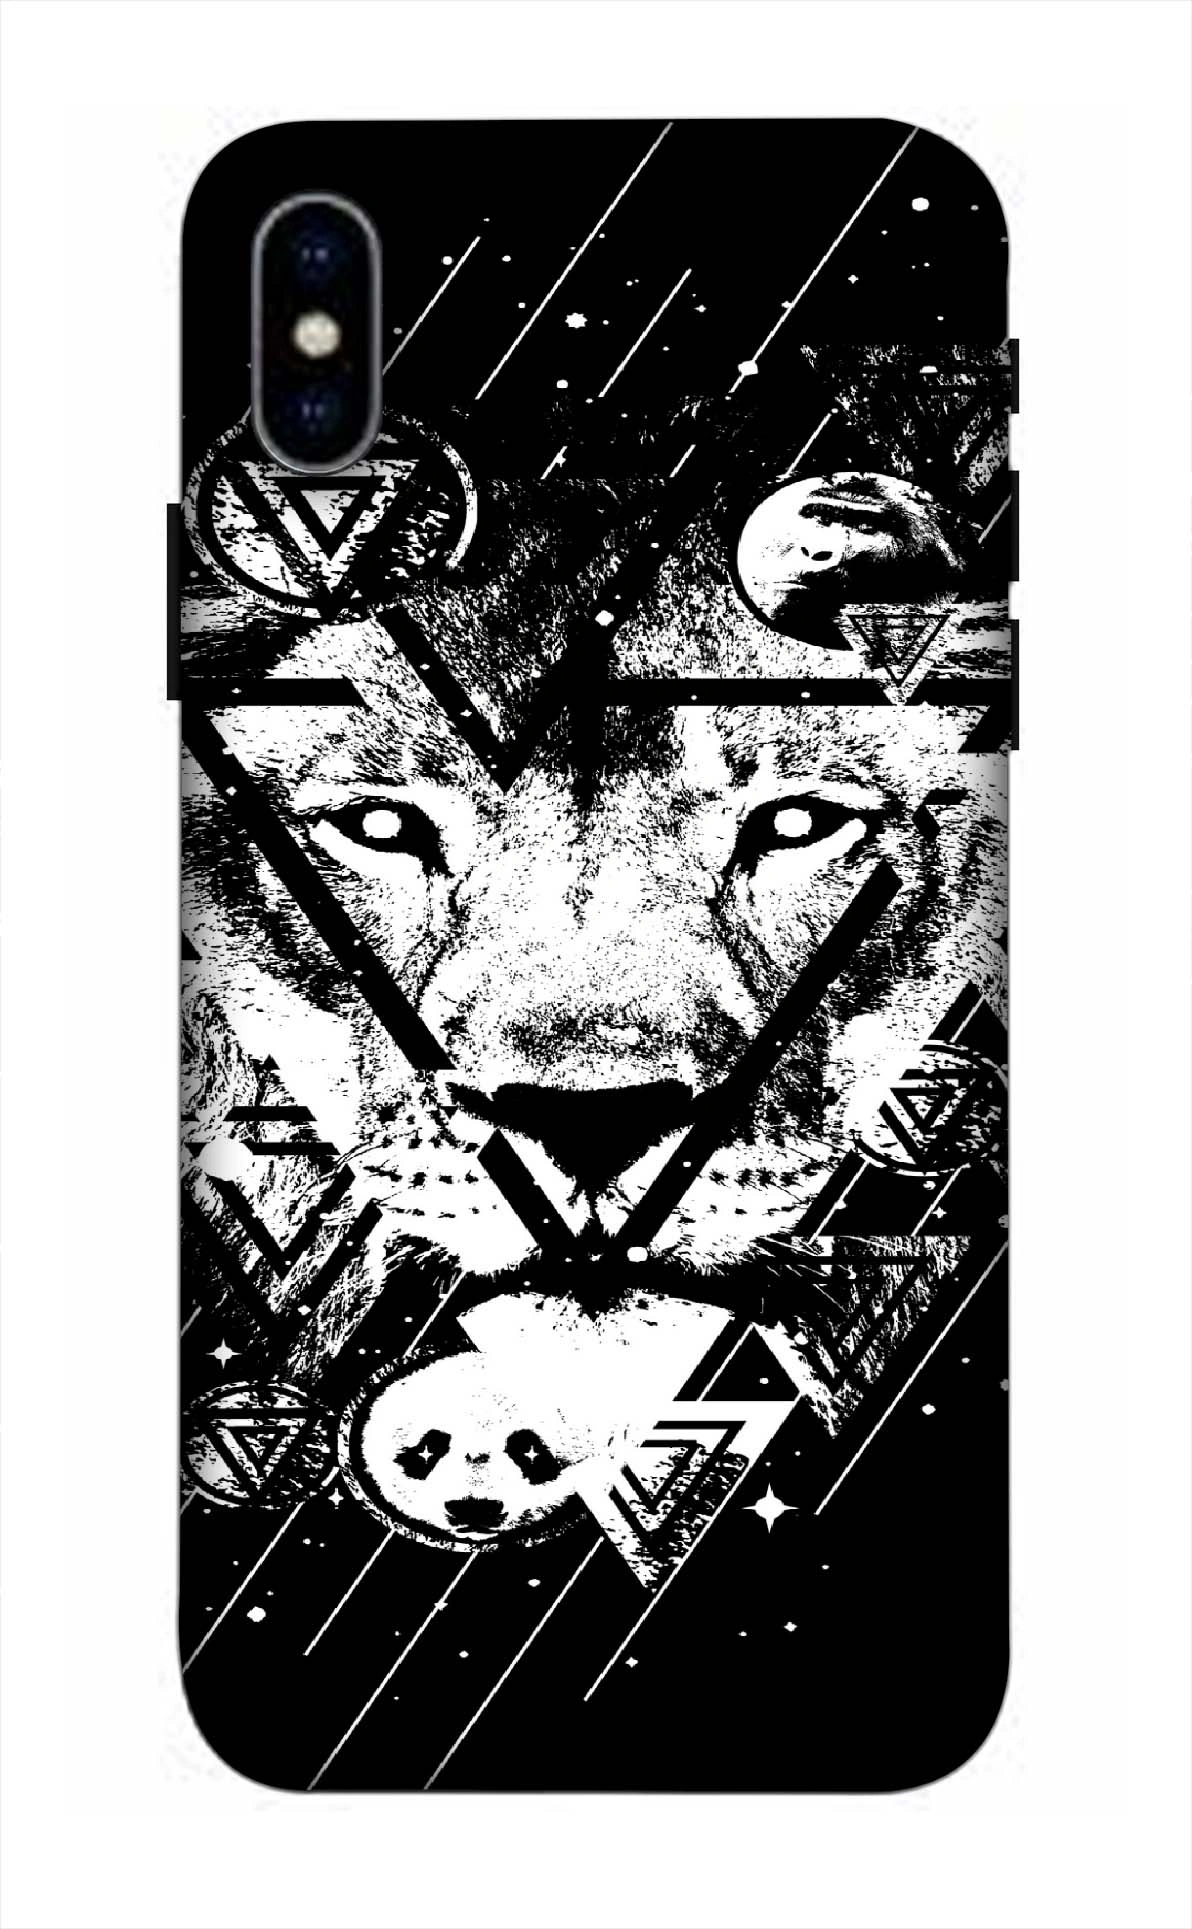 14 Phone Case Drawings ideas  case iphone cases drawings